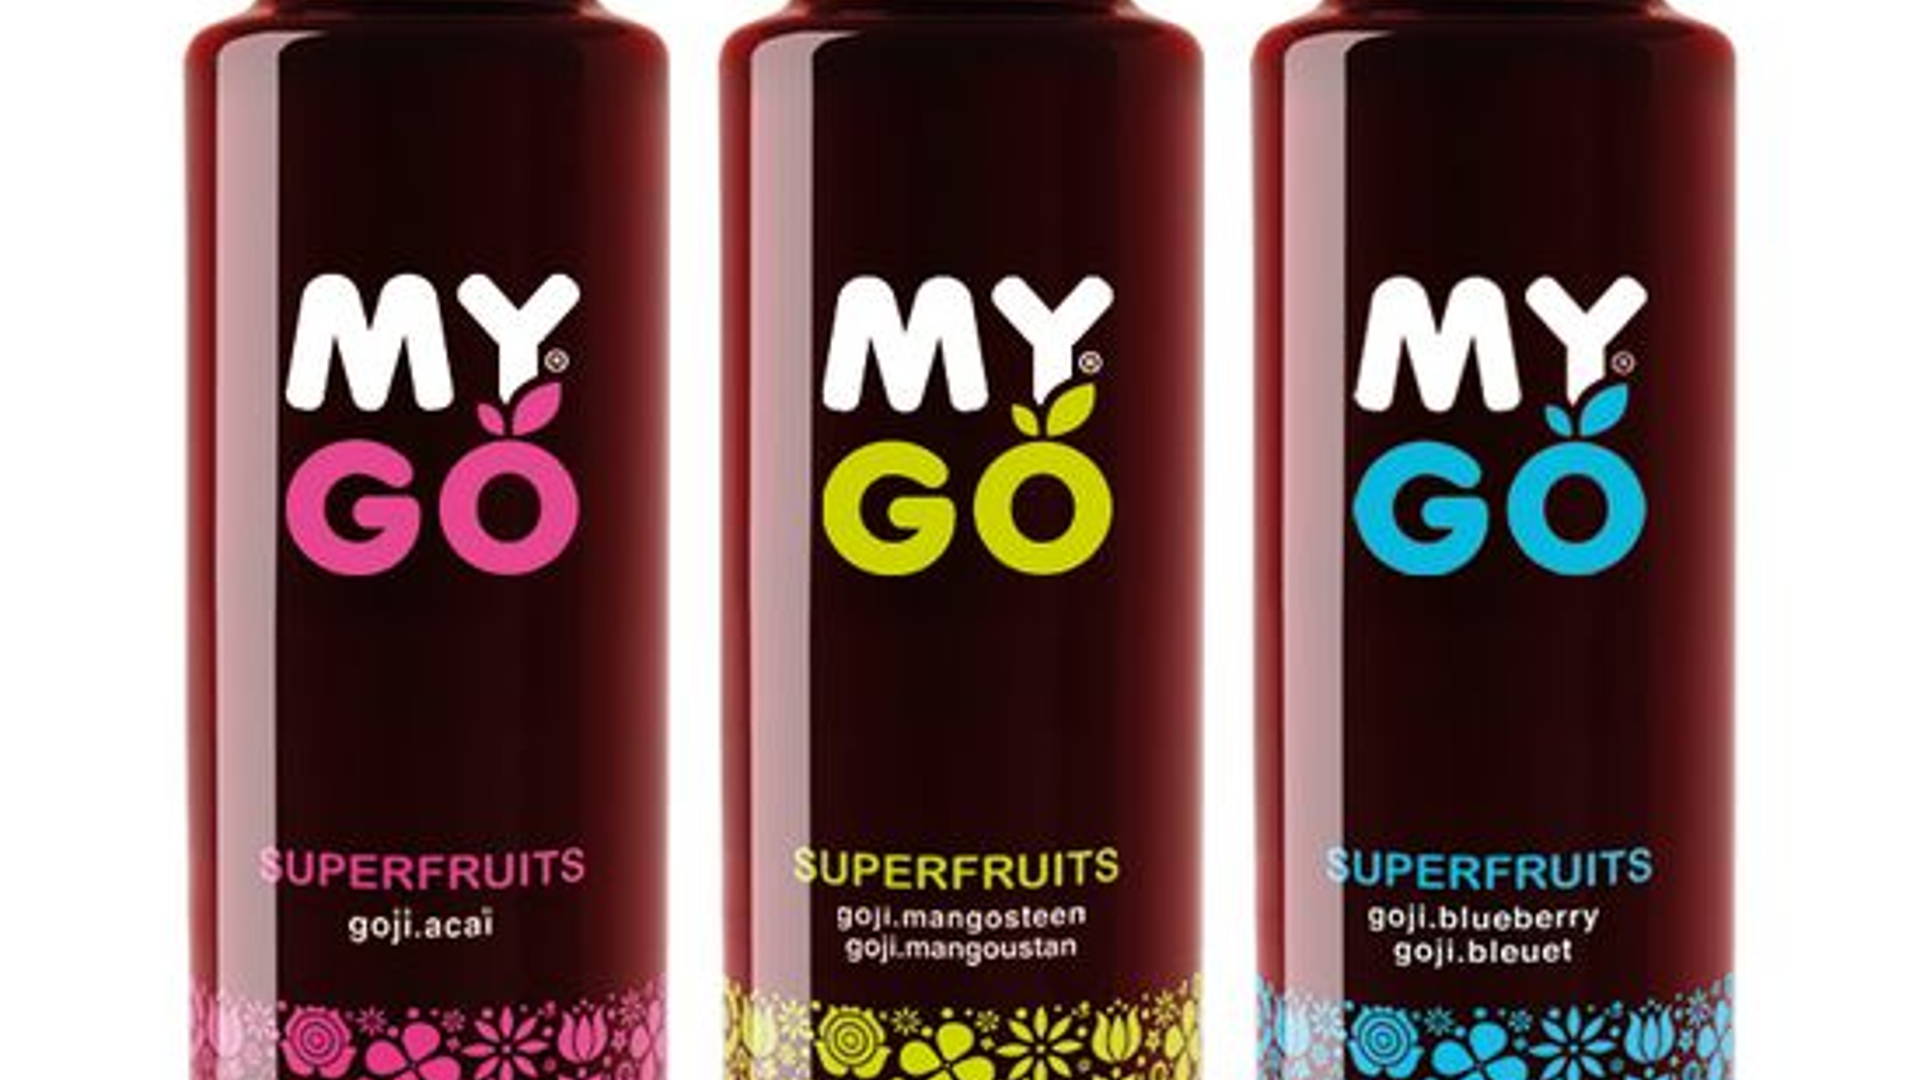 Featured image for MYGO: a new generation of drink